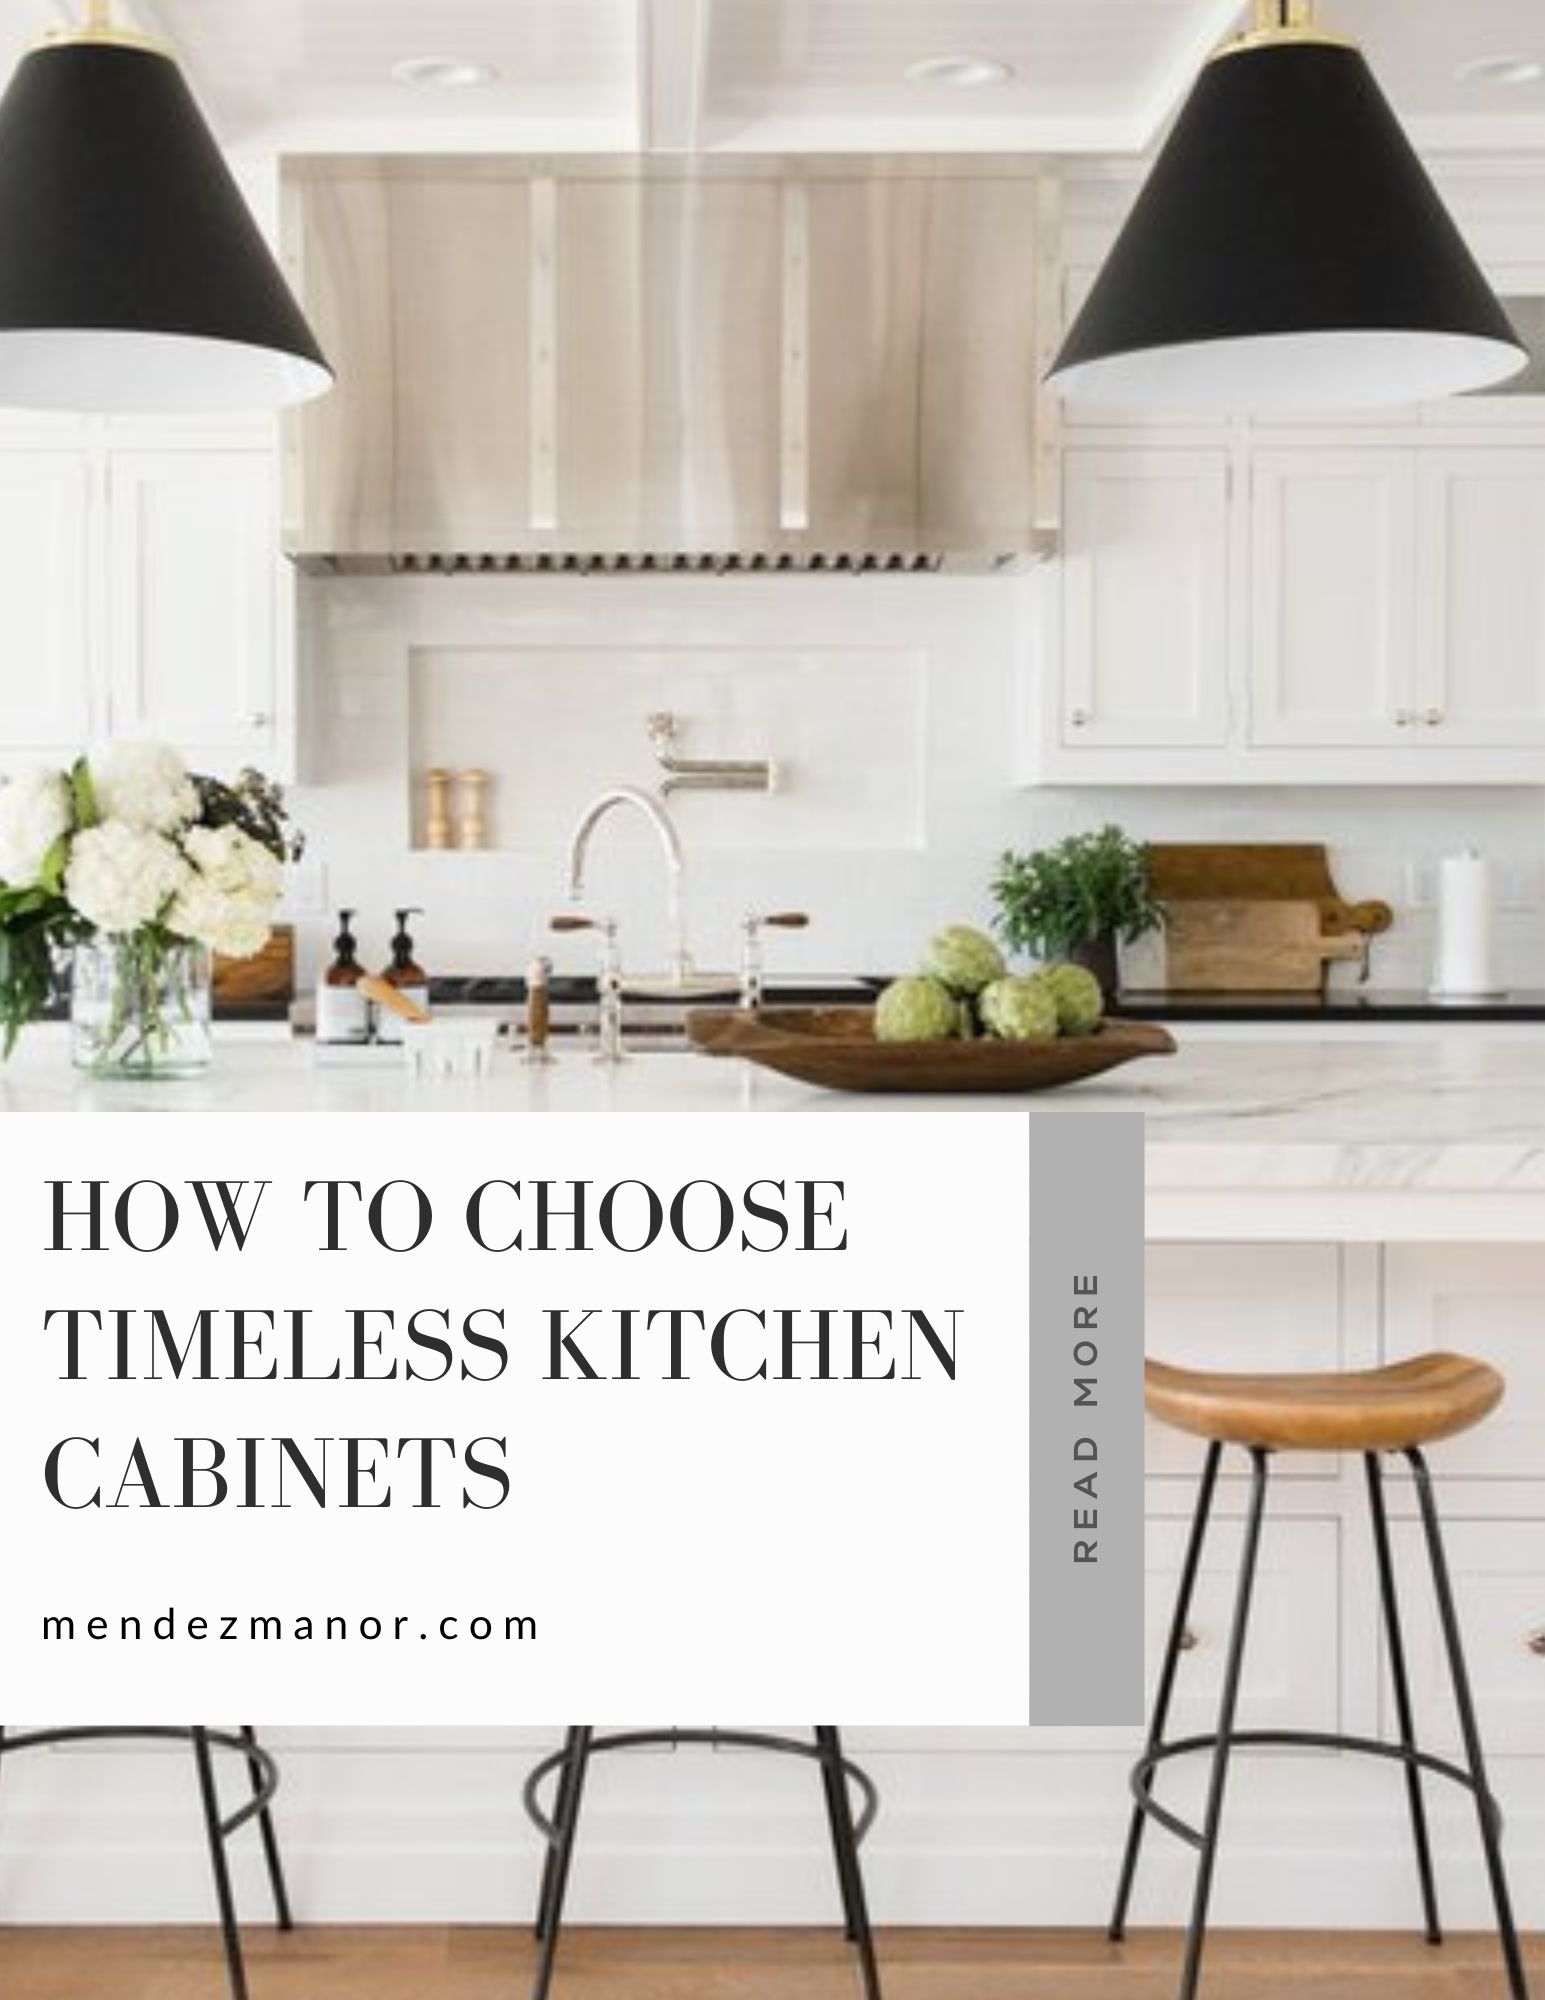 How to choose timeless kitchen cabinets